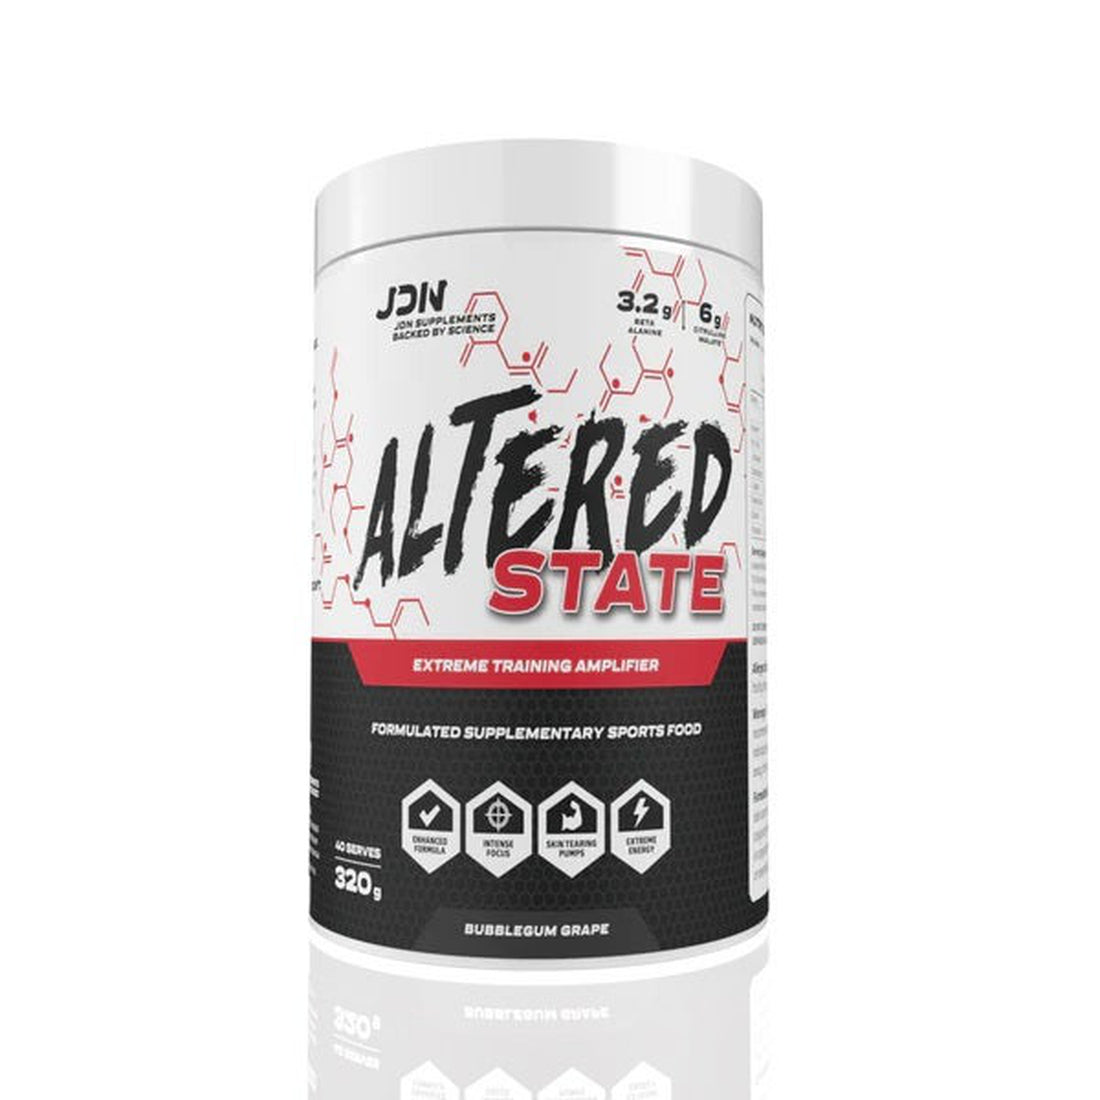 JDN Altered State Pre Workout